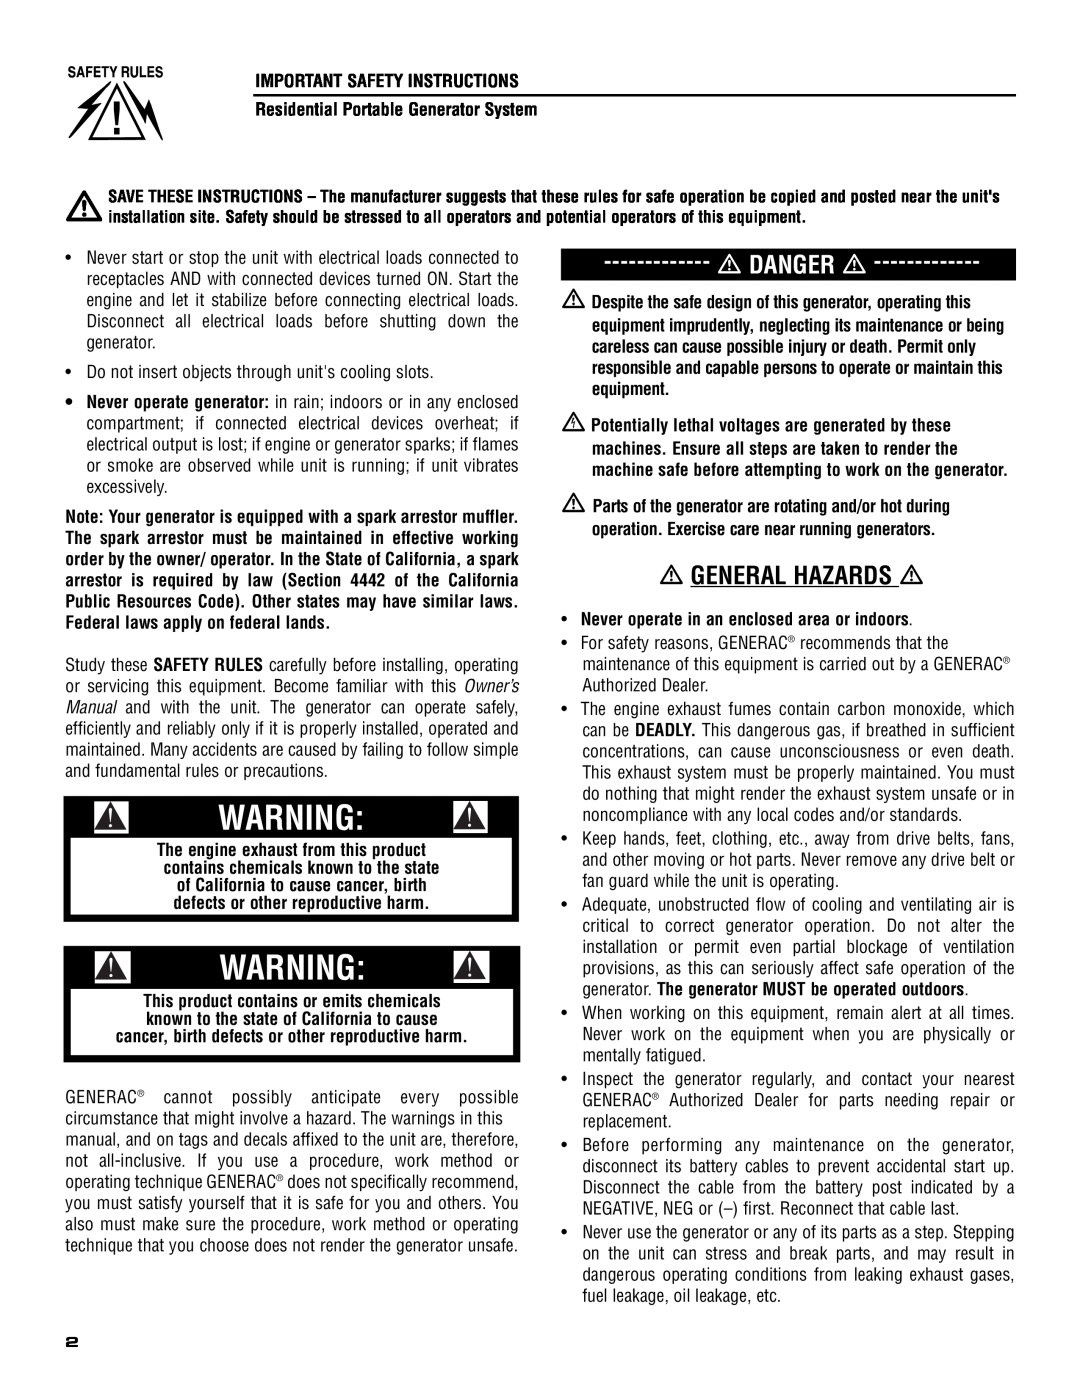 Generac 005308-0 owner manual General Hazards, Danger, IMPORTANT SAFETY INSTRUCTIONS Residential Portable Generator System 